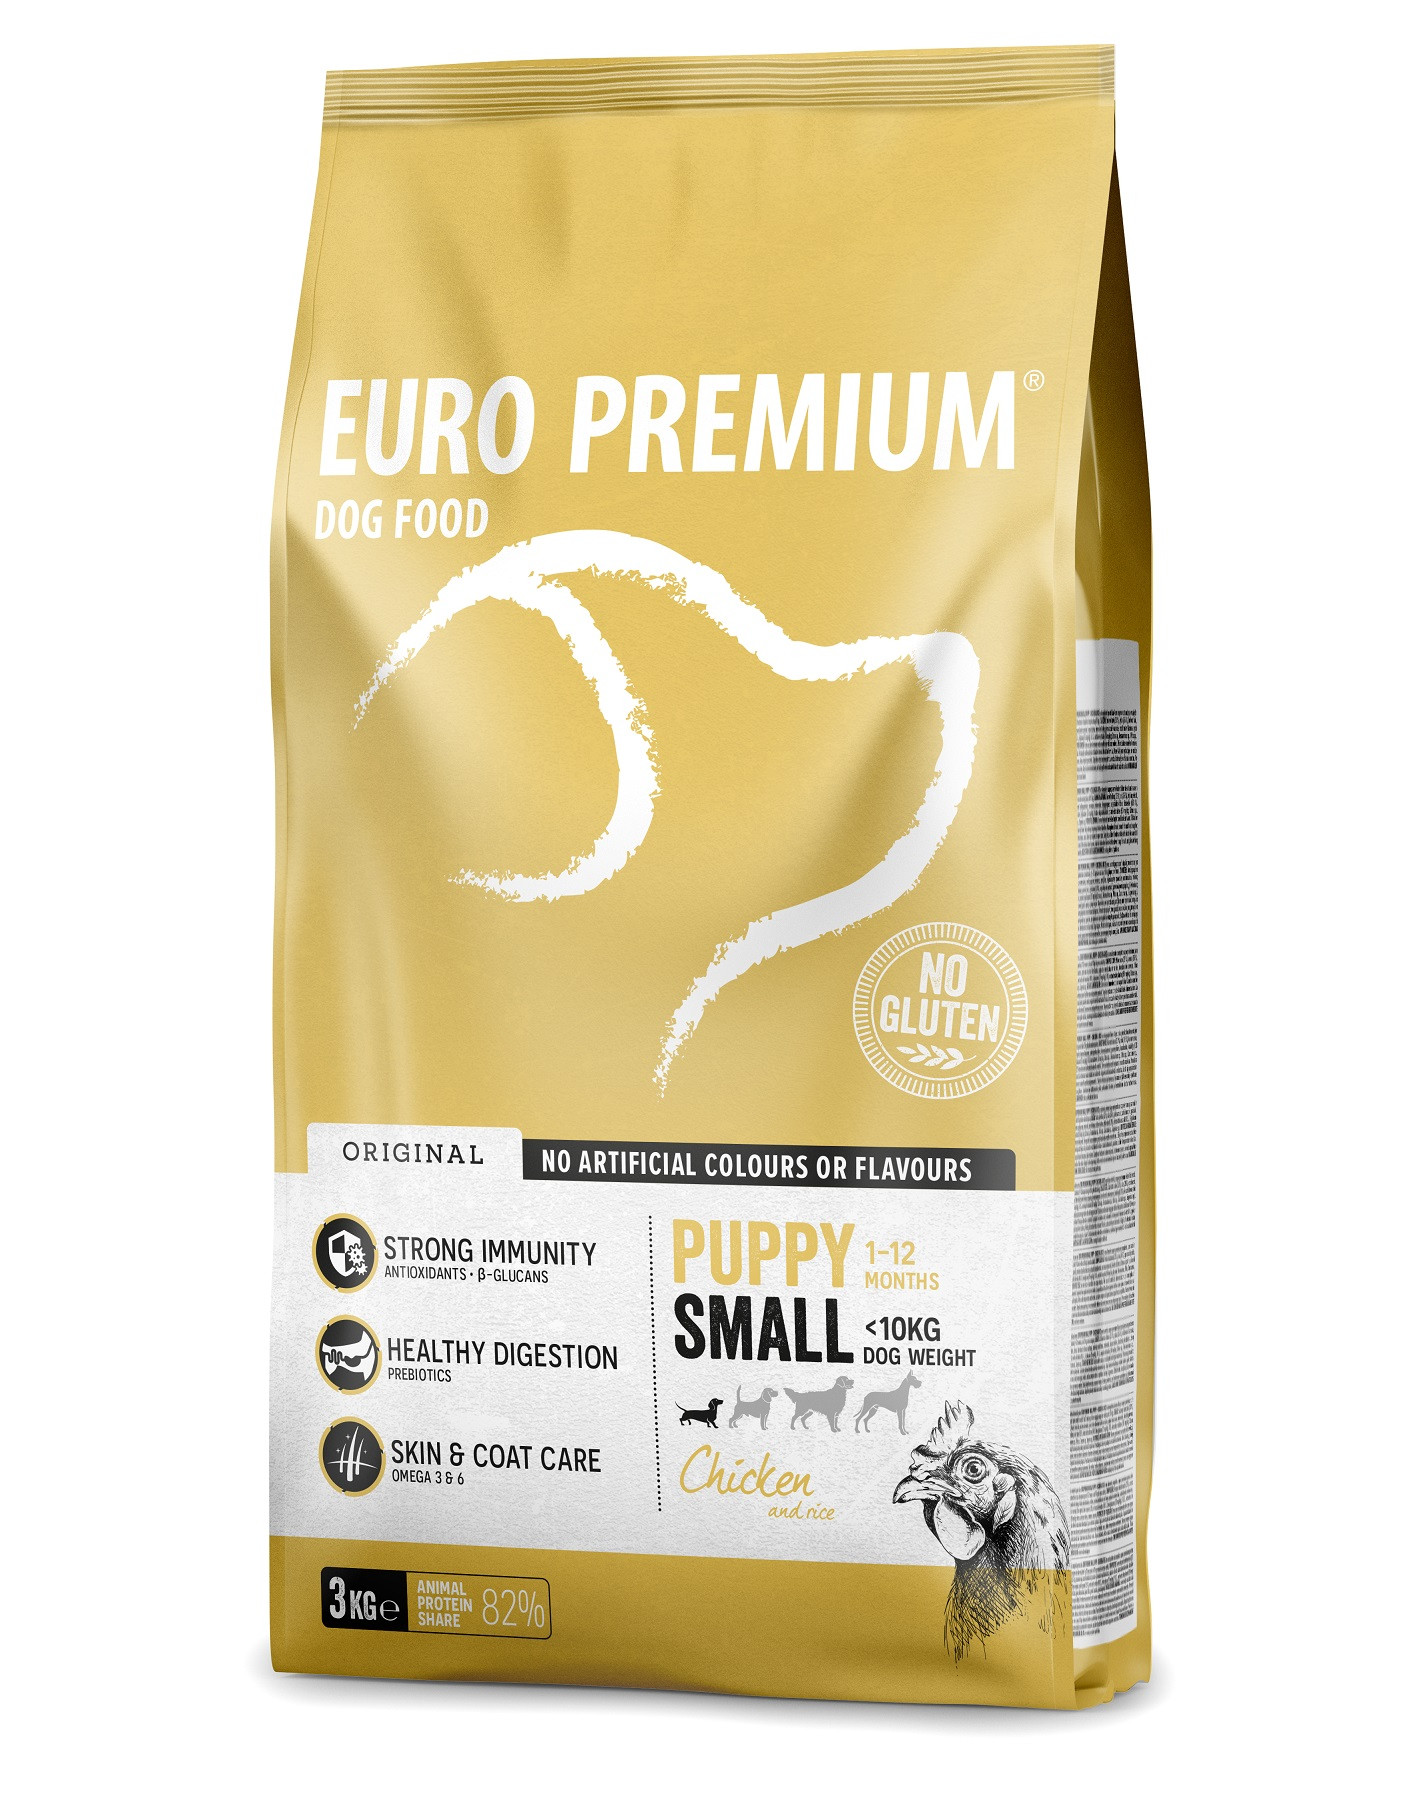 Euro Premium Puppy Small Huhn & Reis Hundefutter